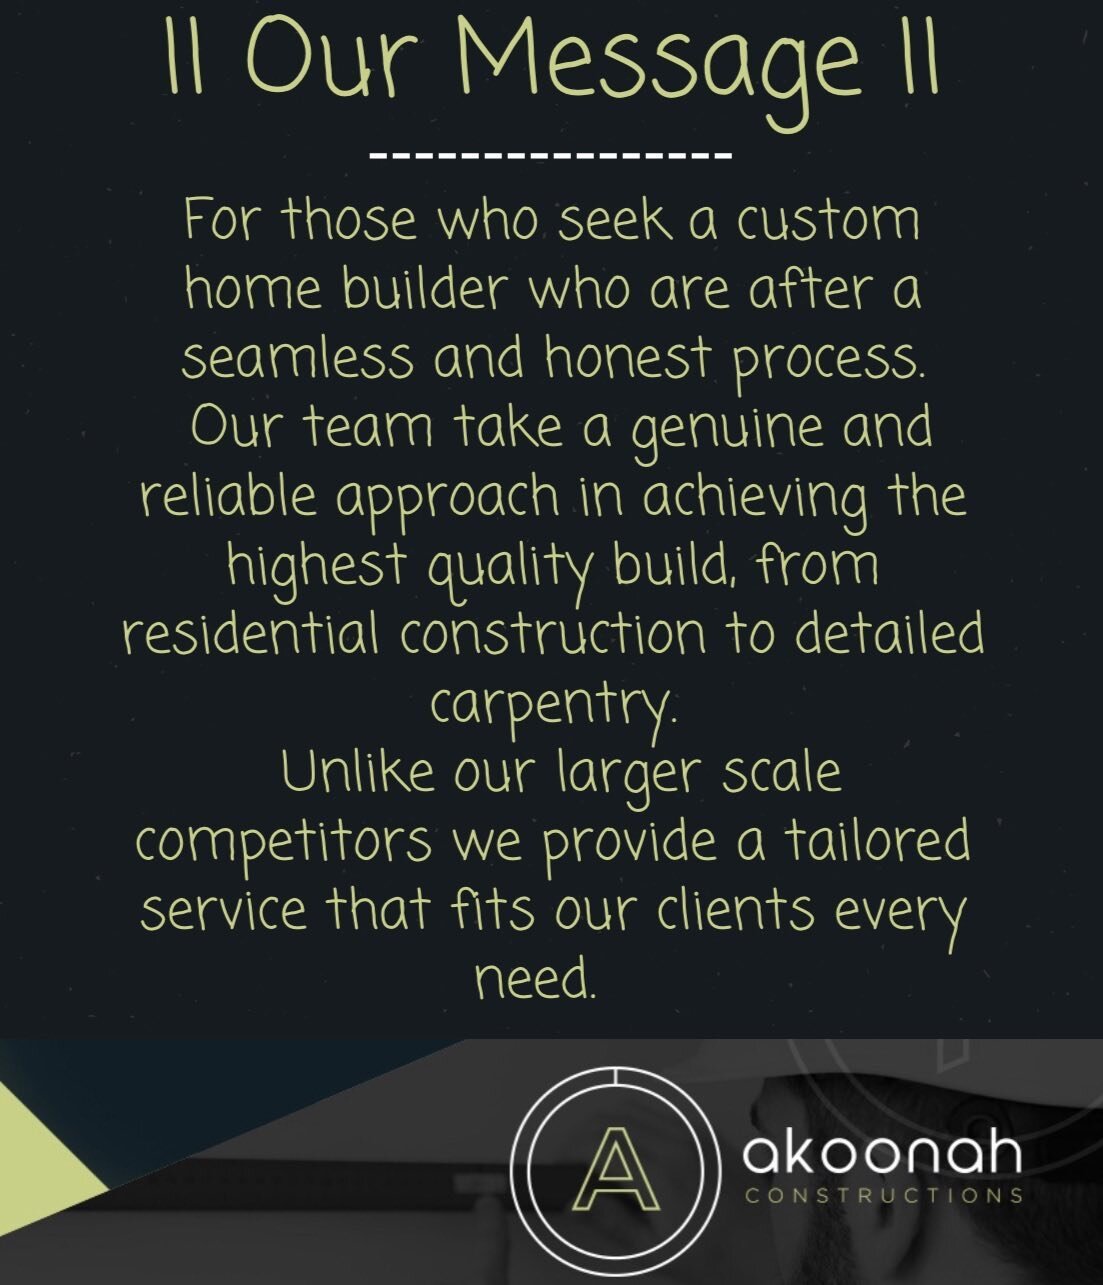 Our message. 
.
.
.
For those who seek a custom home builder who are after a seamless and honest process, Our team take a genuine and reliable approach in achieving the highest quality build. 
From residential construction to detailed carpentry, unli